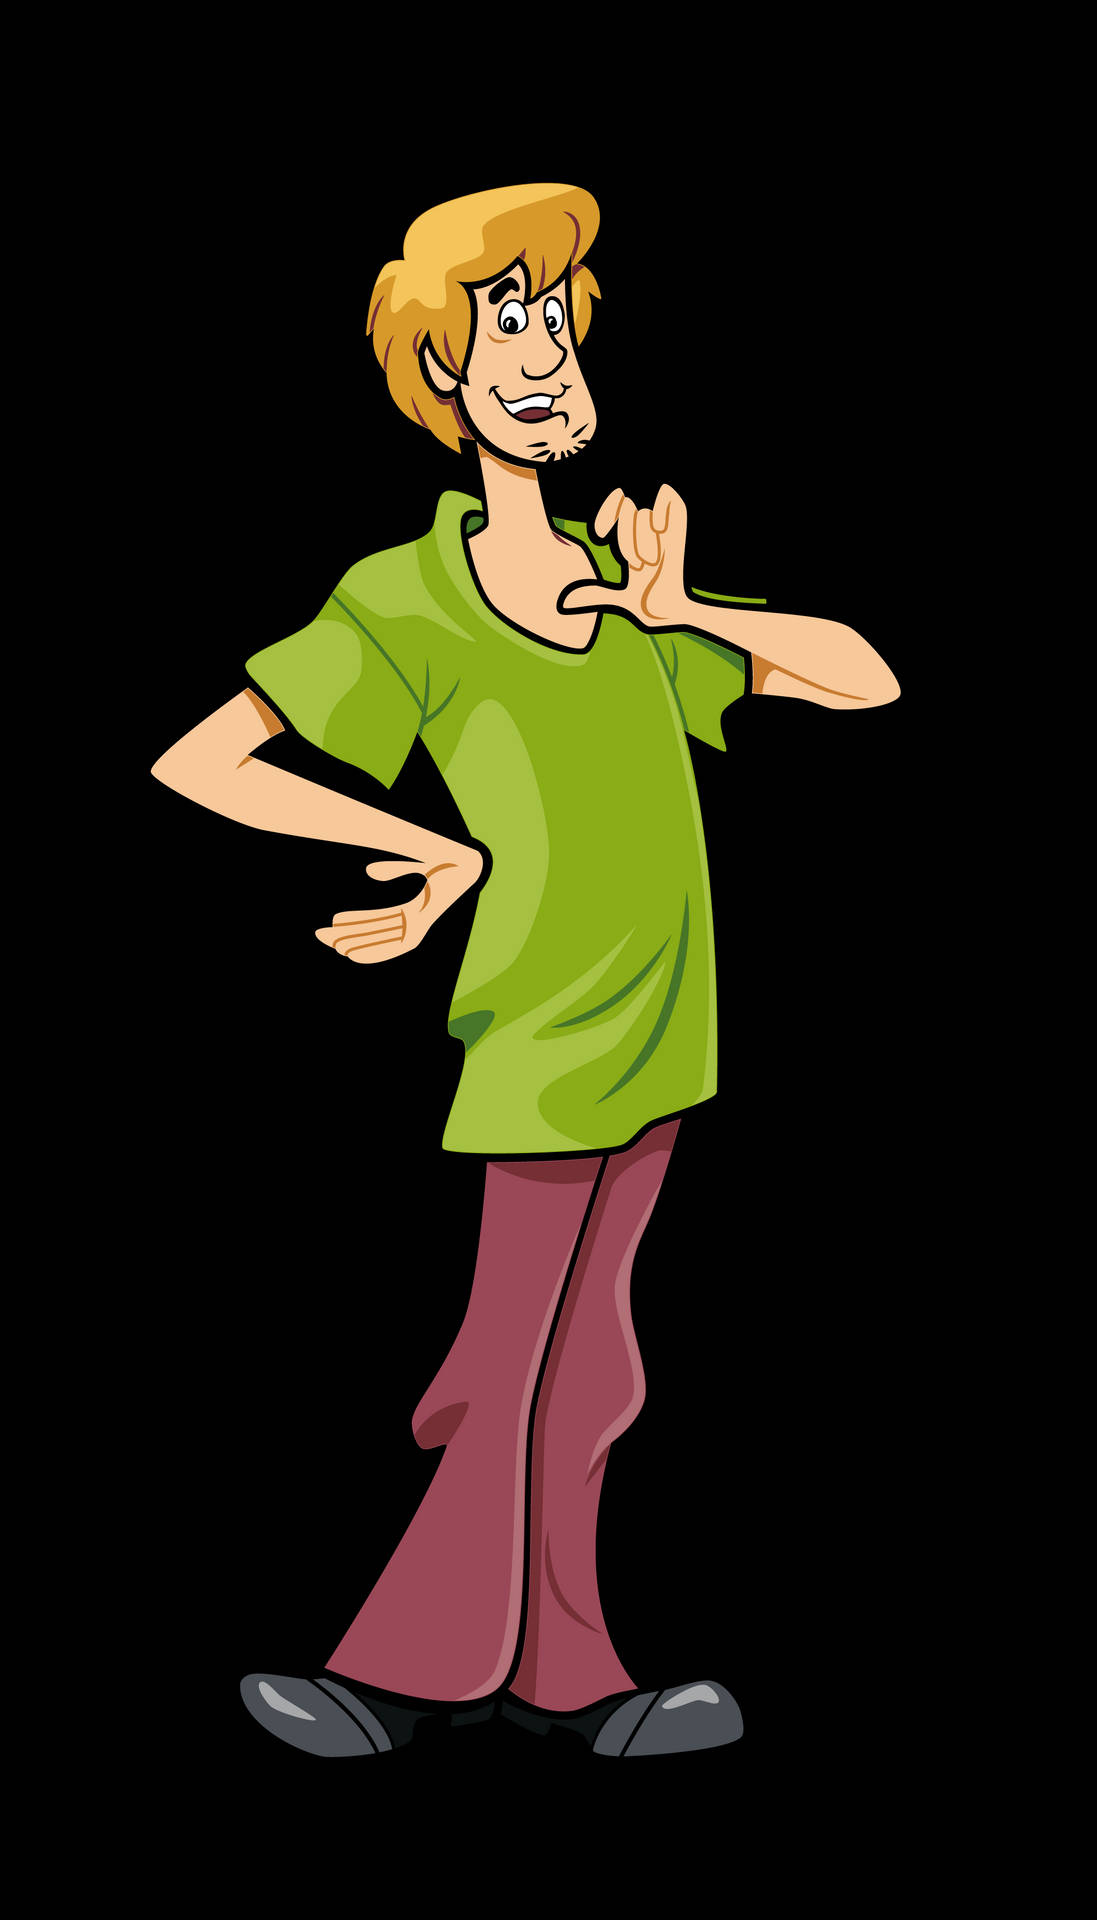 Shaggy In A Flying Hovercraft From Scooby-doo Animated Series Wallpaper